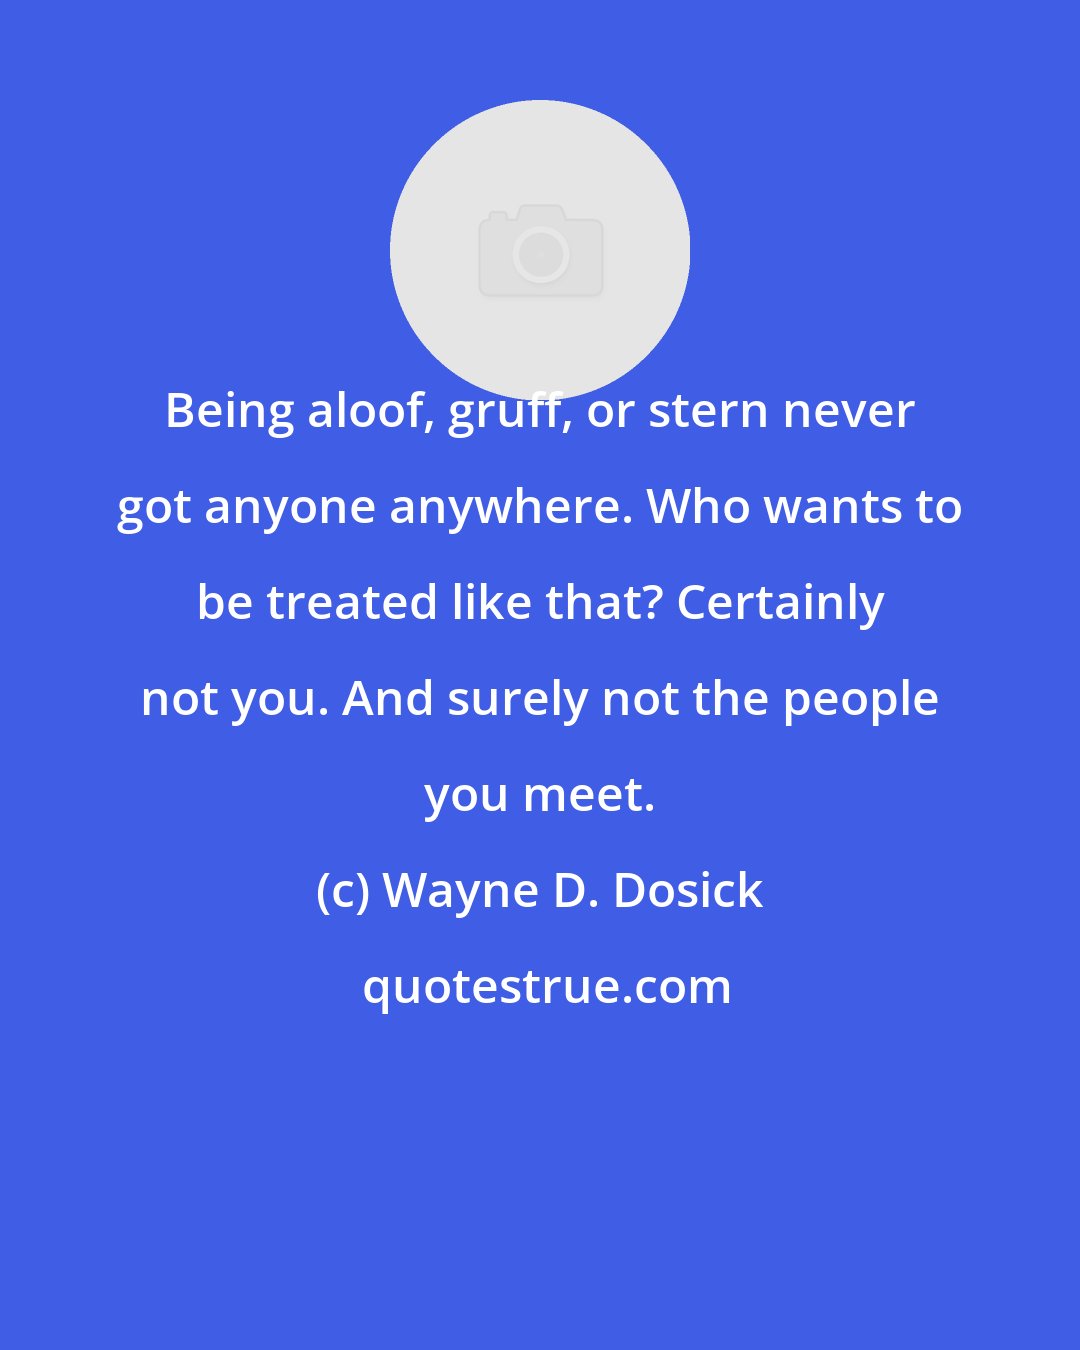 Wayne D. Dosick: Being aloof, gruff, or stern never got anyone anywhere. Who wants to be treated like that? Certainly not you. And surely not the people you meet.